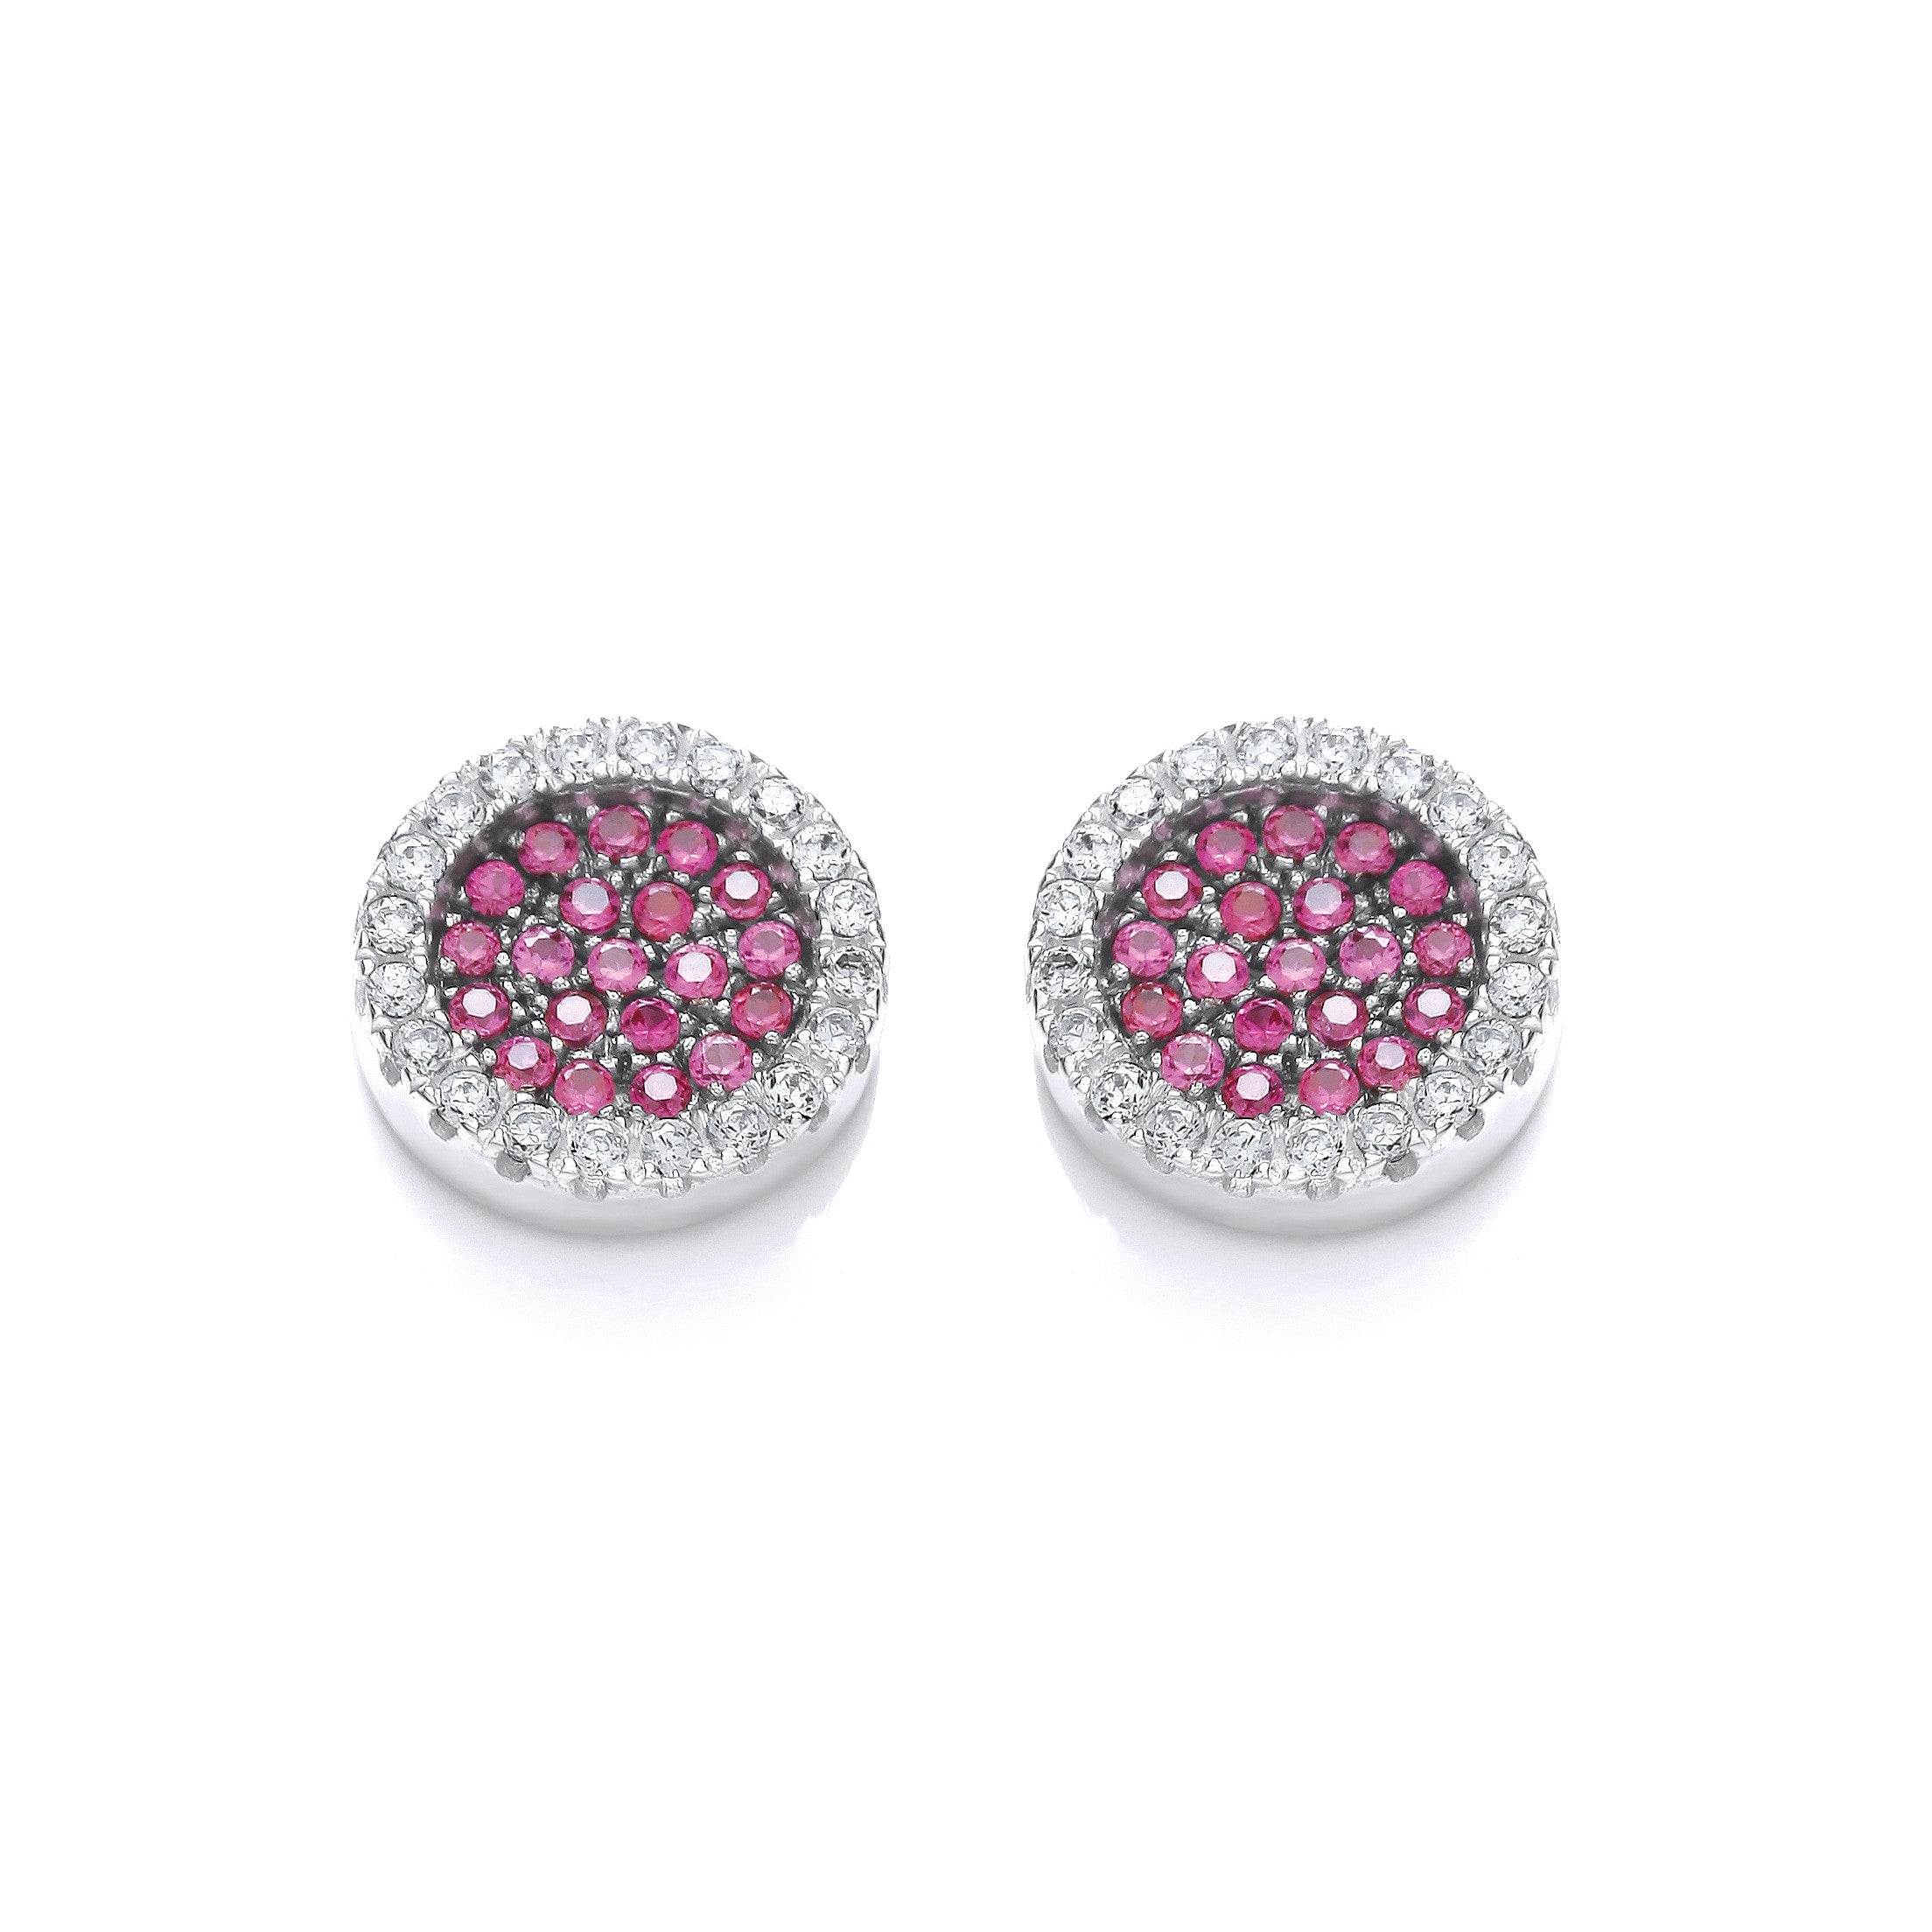 Micro Pave' Round Pink Cz Stud Earrings